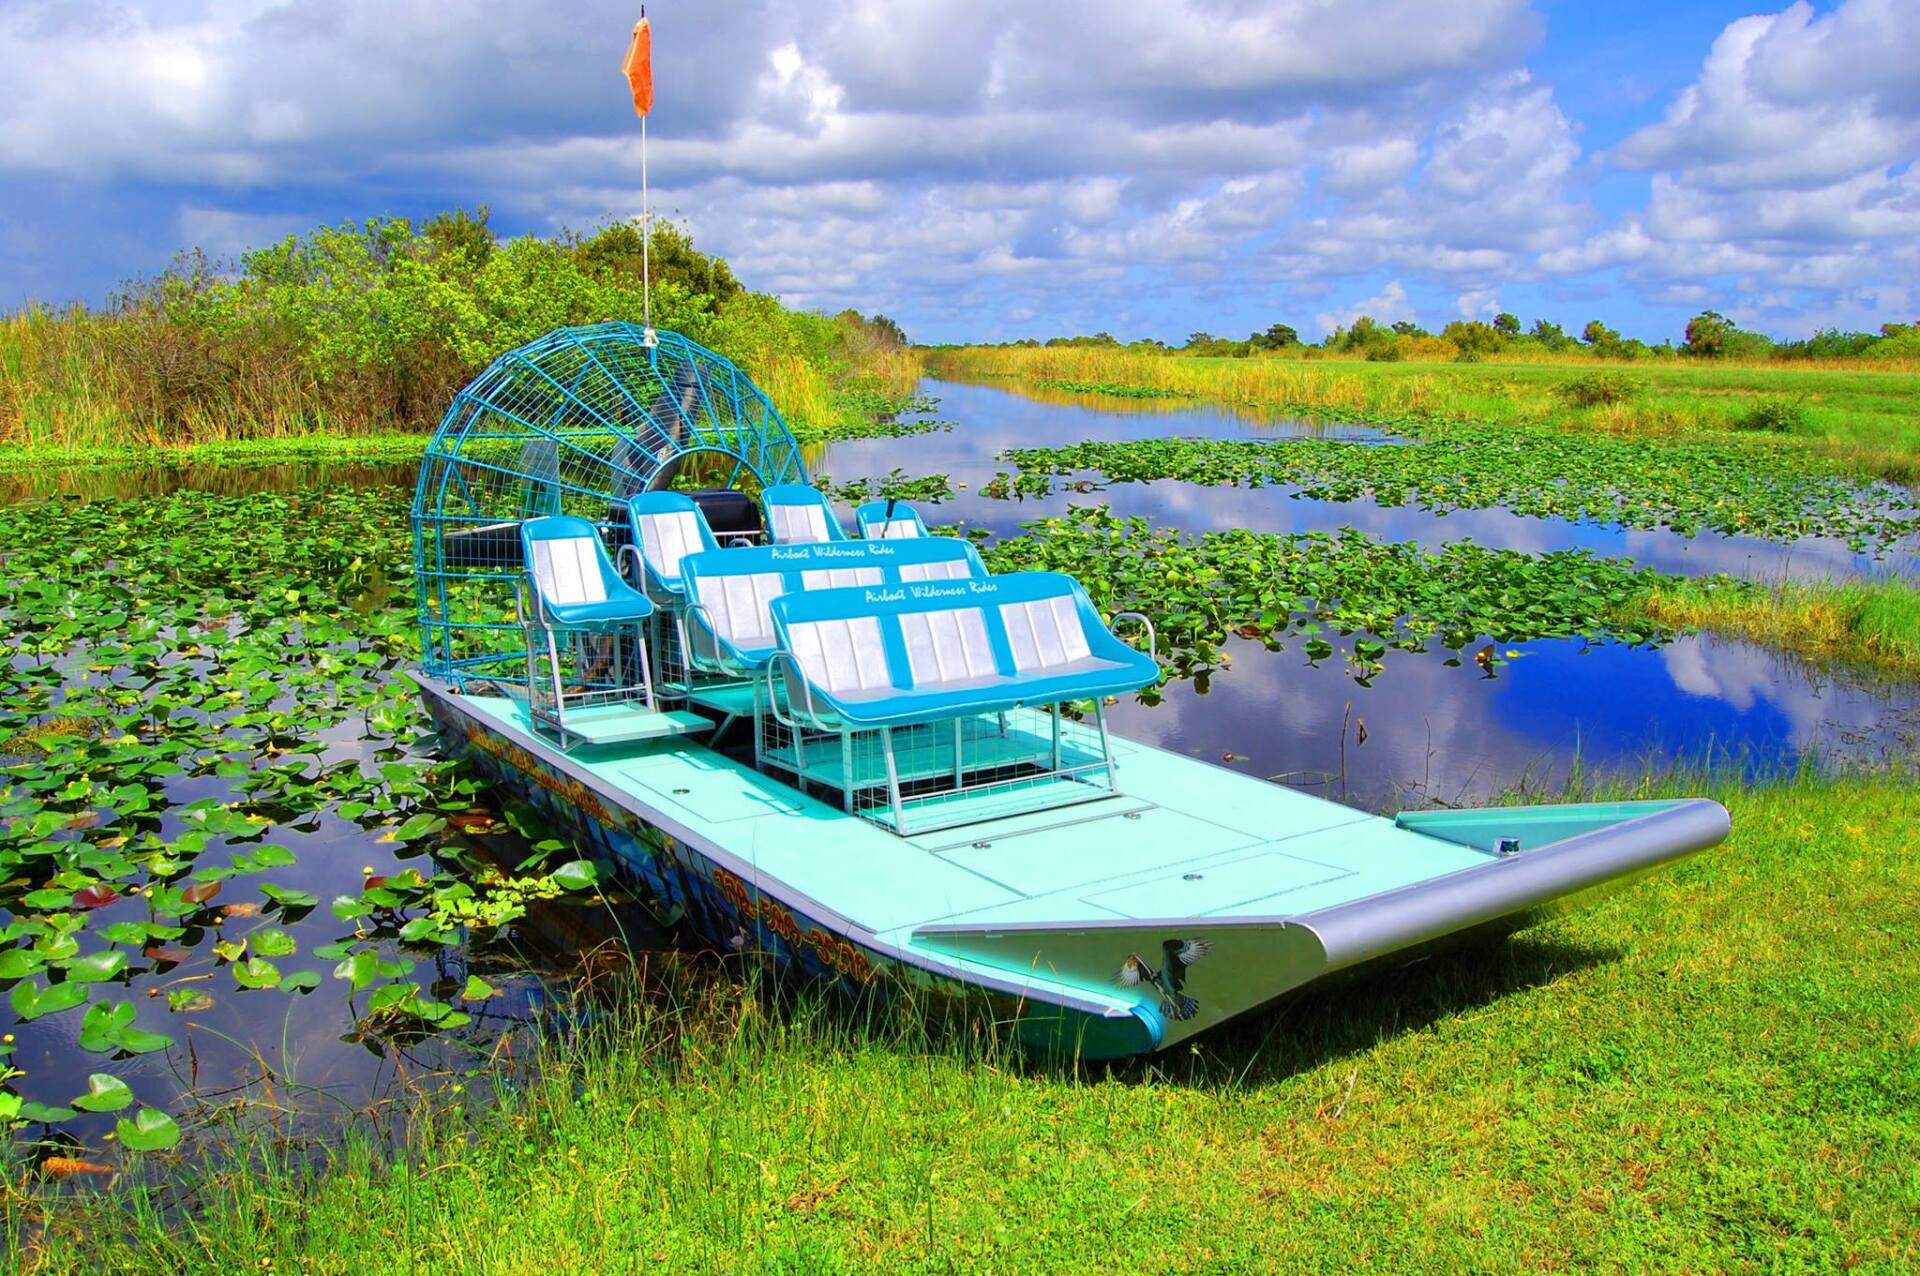 Parked airboat for tours